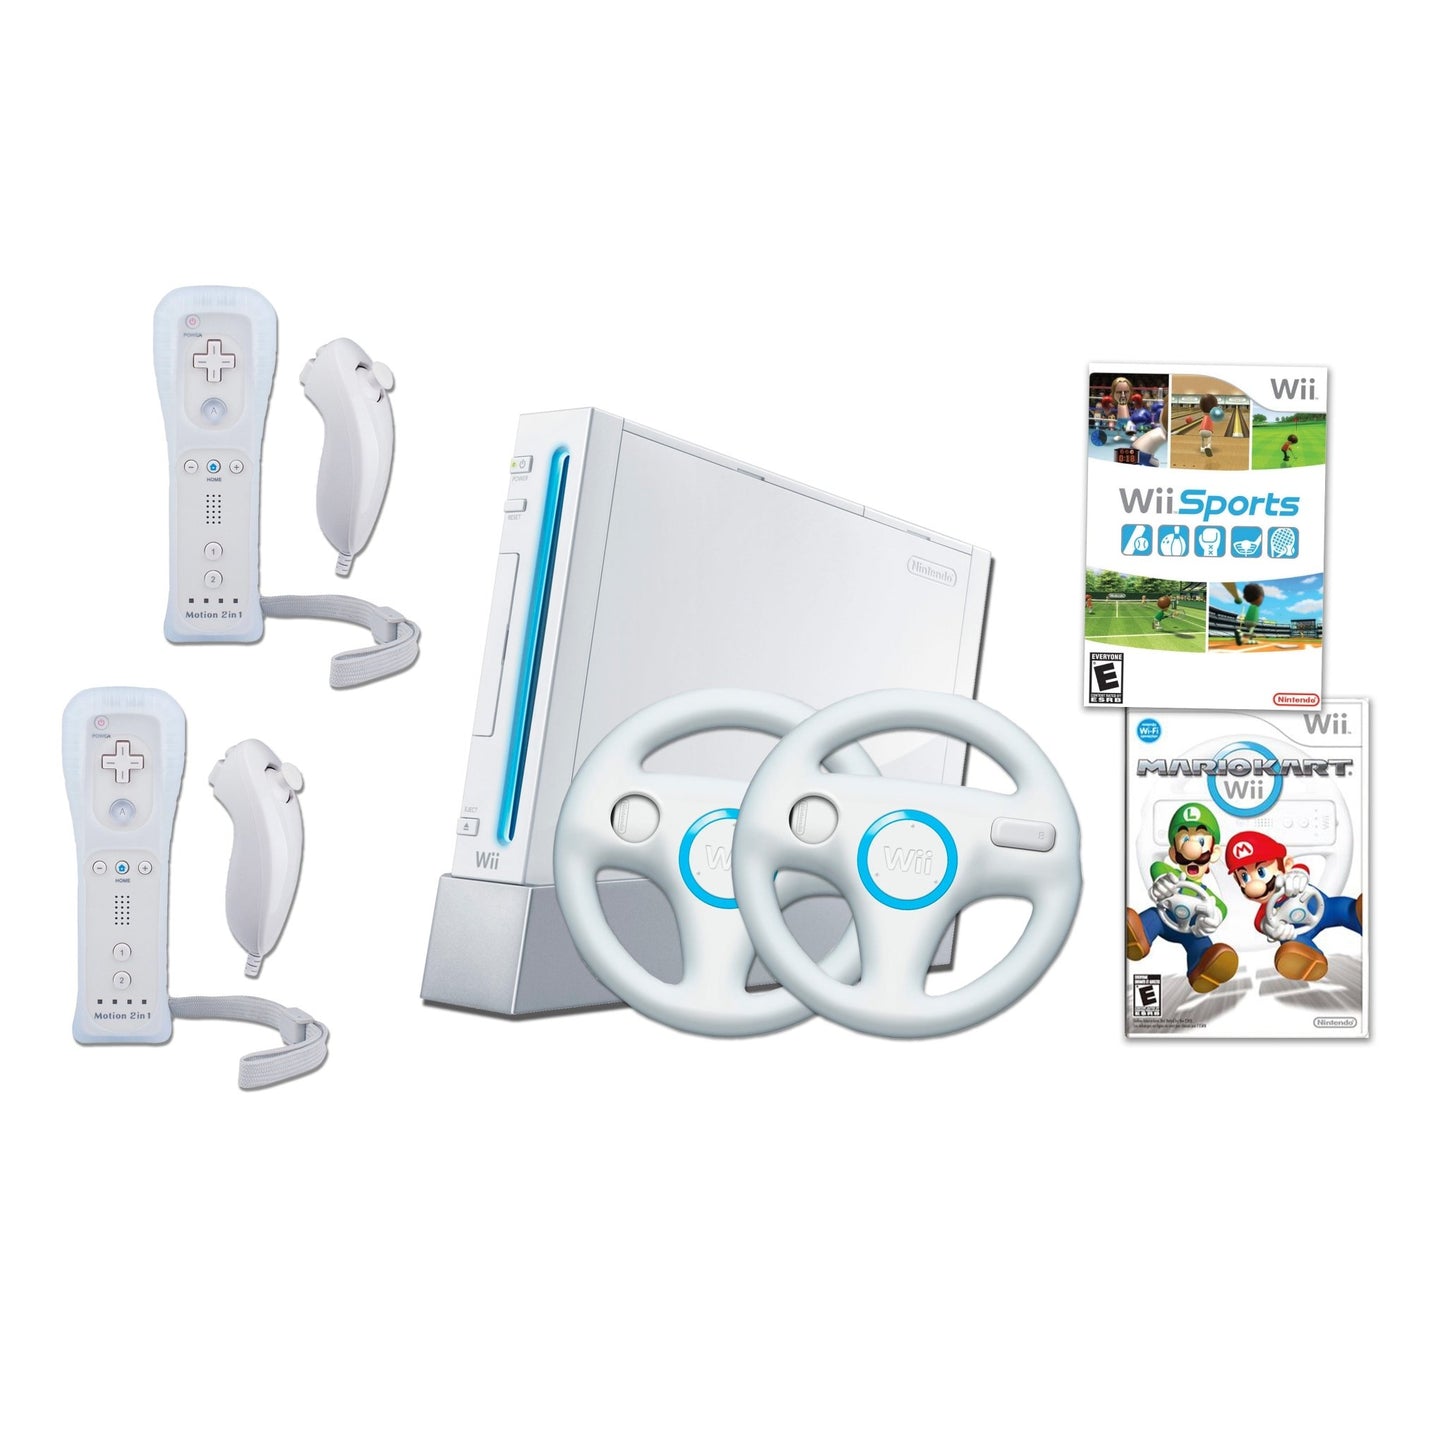 Nintendo Wii Console Bundle - White - Mario Kart - Wii Sports - 2 Motion Plus Controllers from 2P Gaming